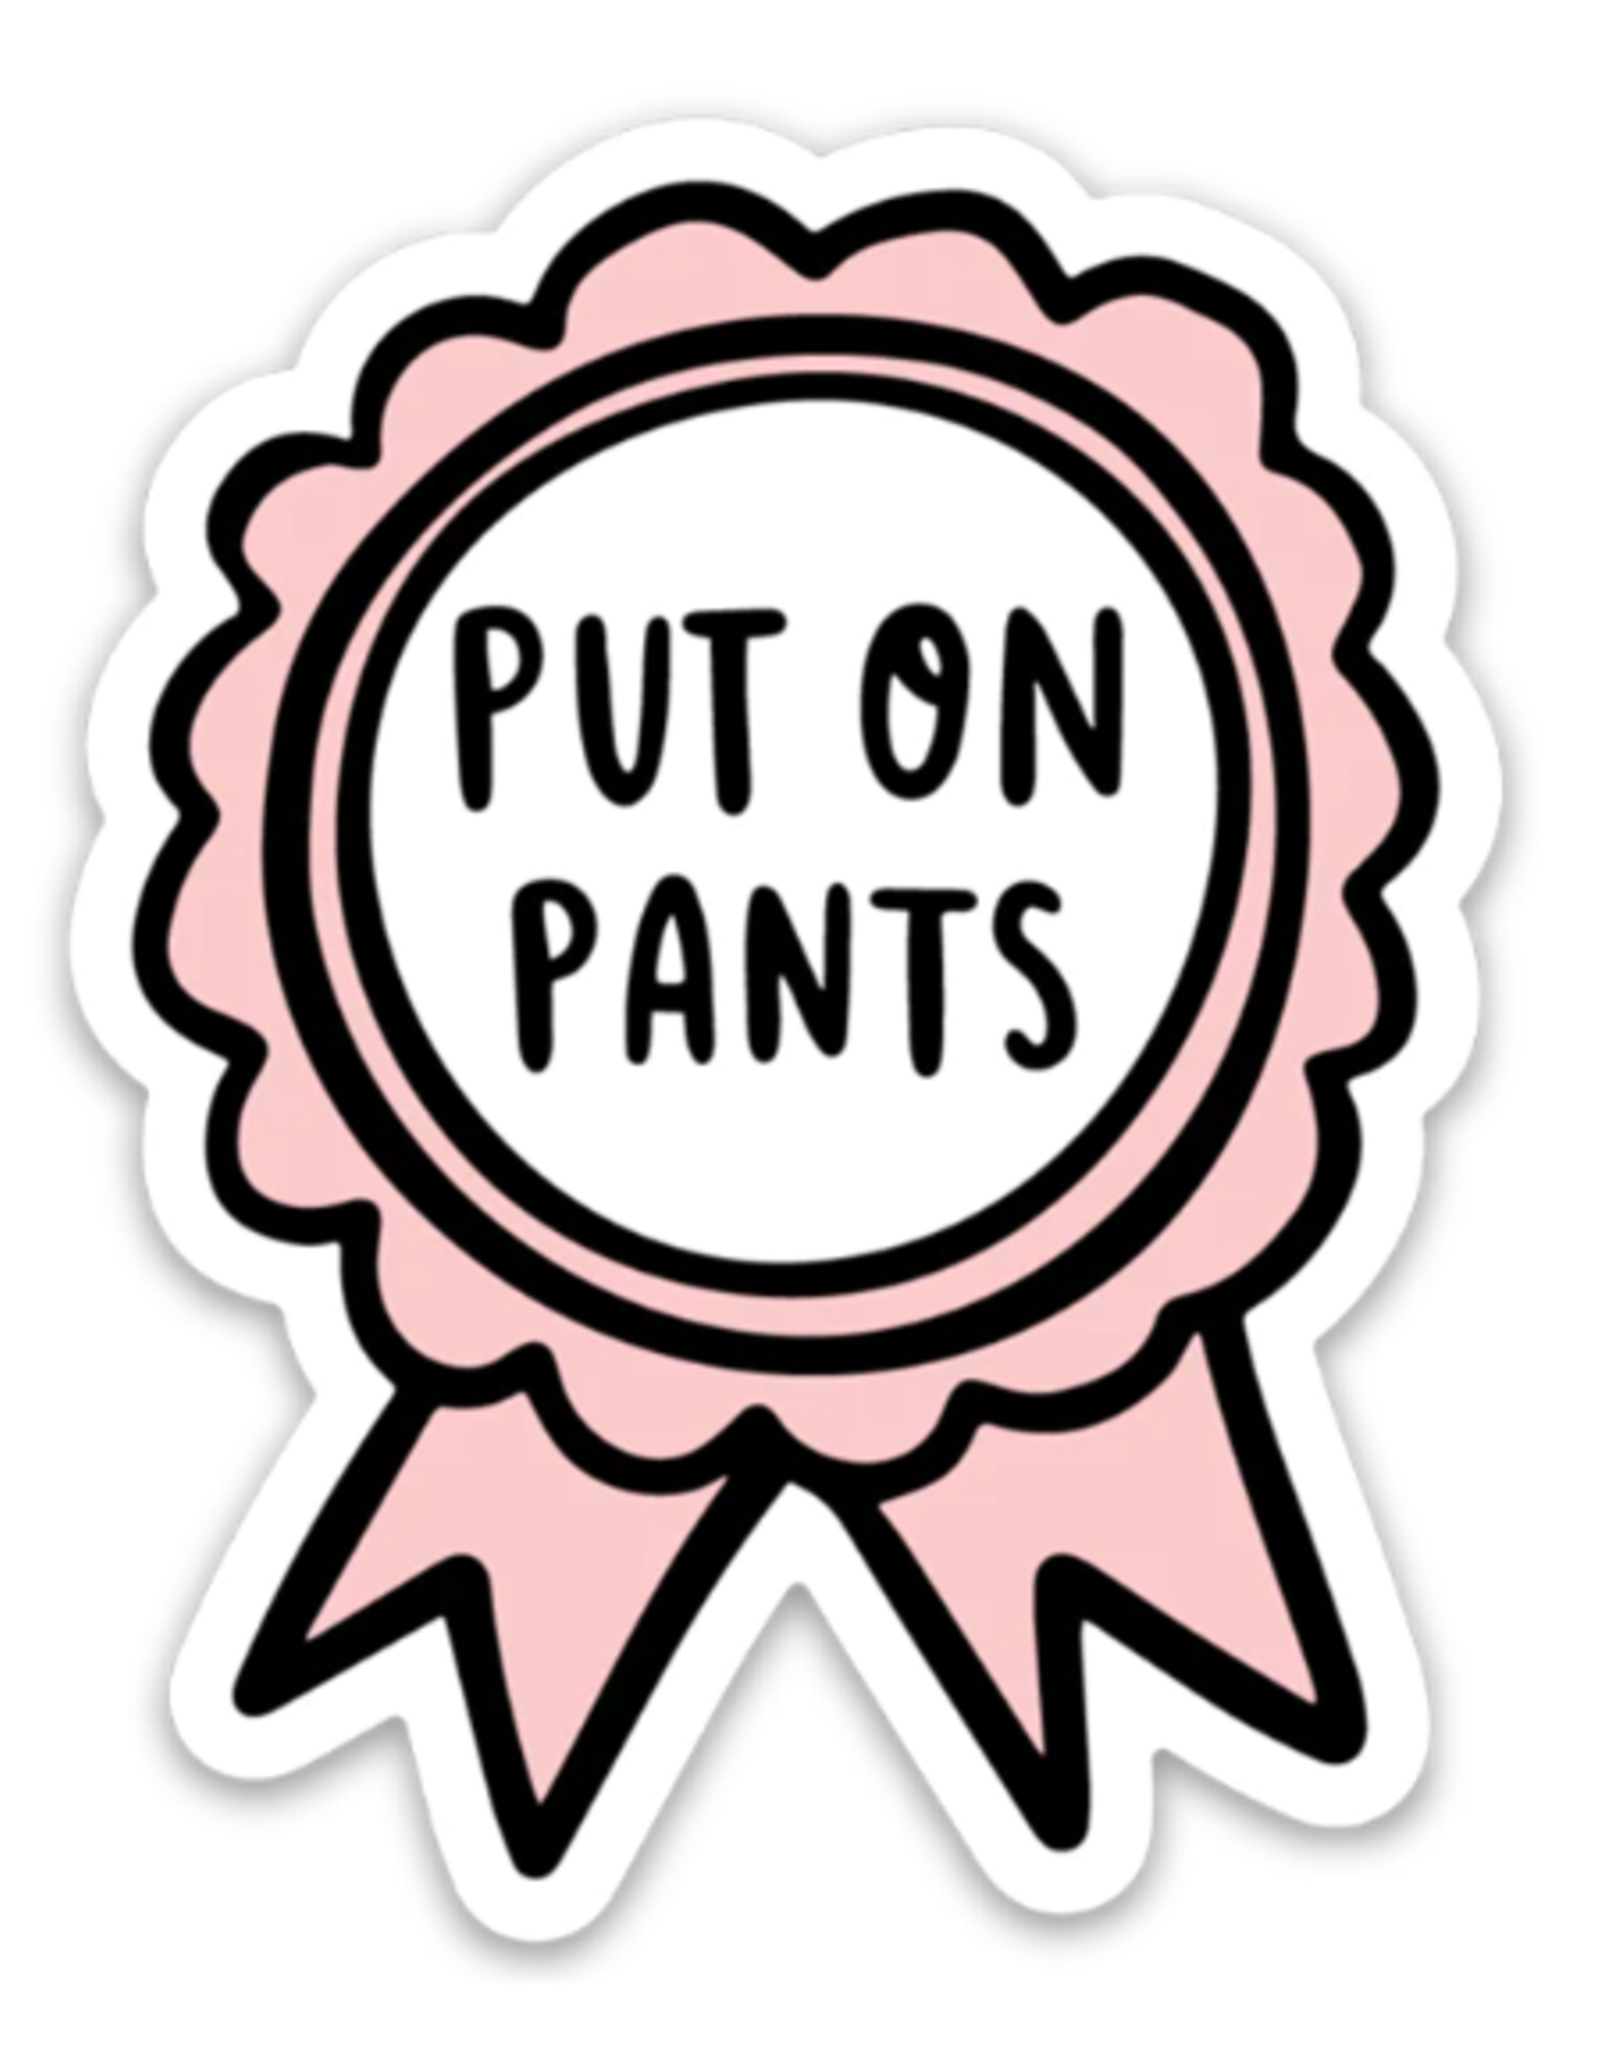 Brittany Paige Stickers: Brittany Paige - Put on pants